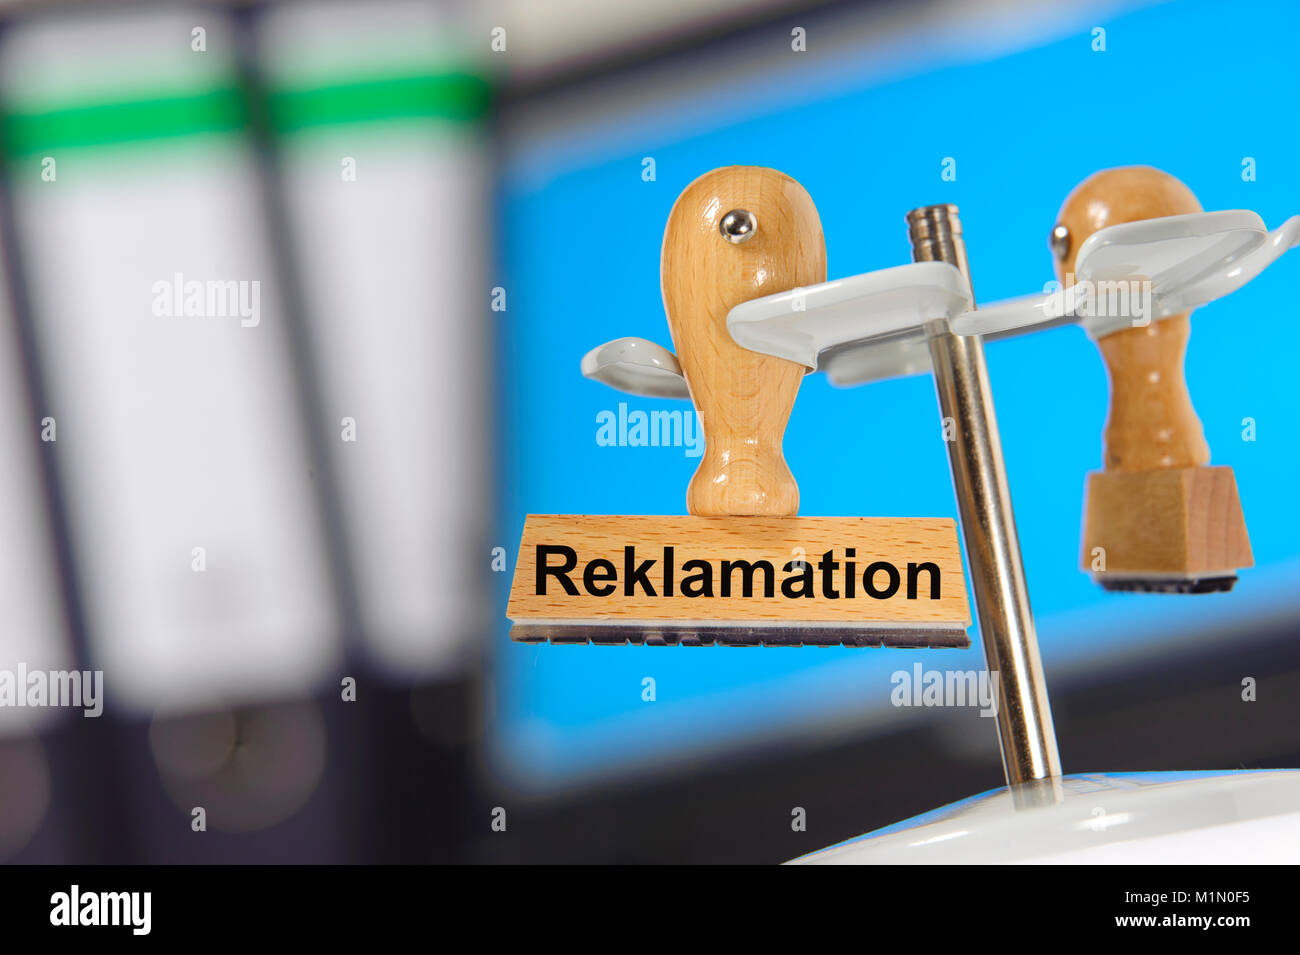 Reklamation printed on german rubber stamp Stock Photo